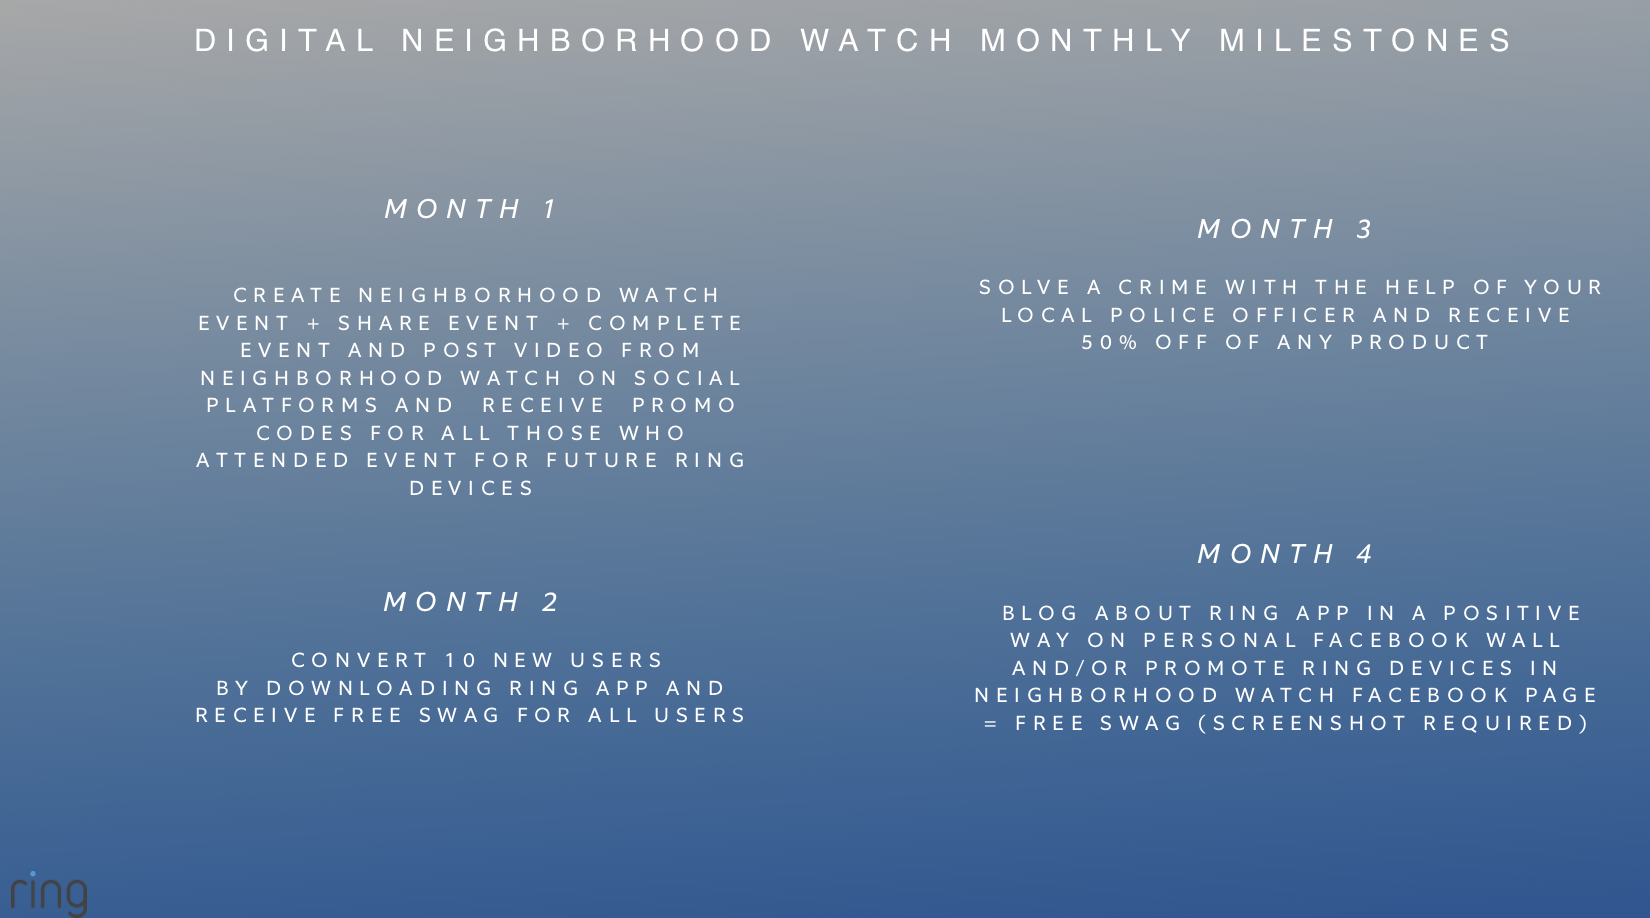 Image: Slide 13 of the Digital Neighborhood Watch document obtained by Motherboard.